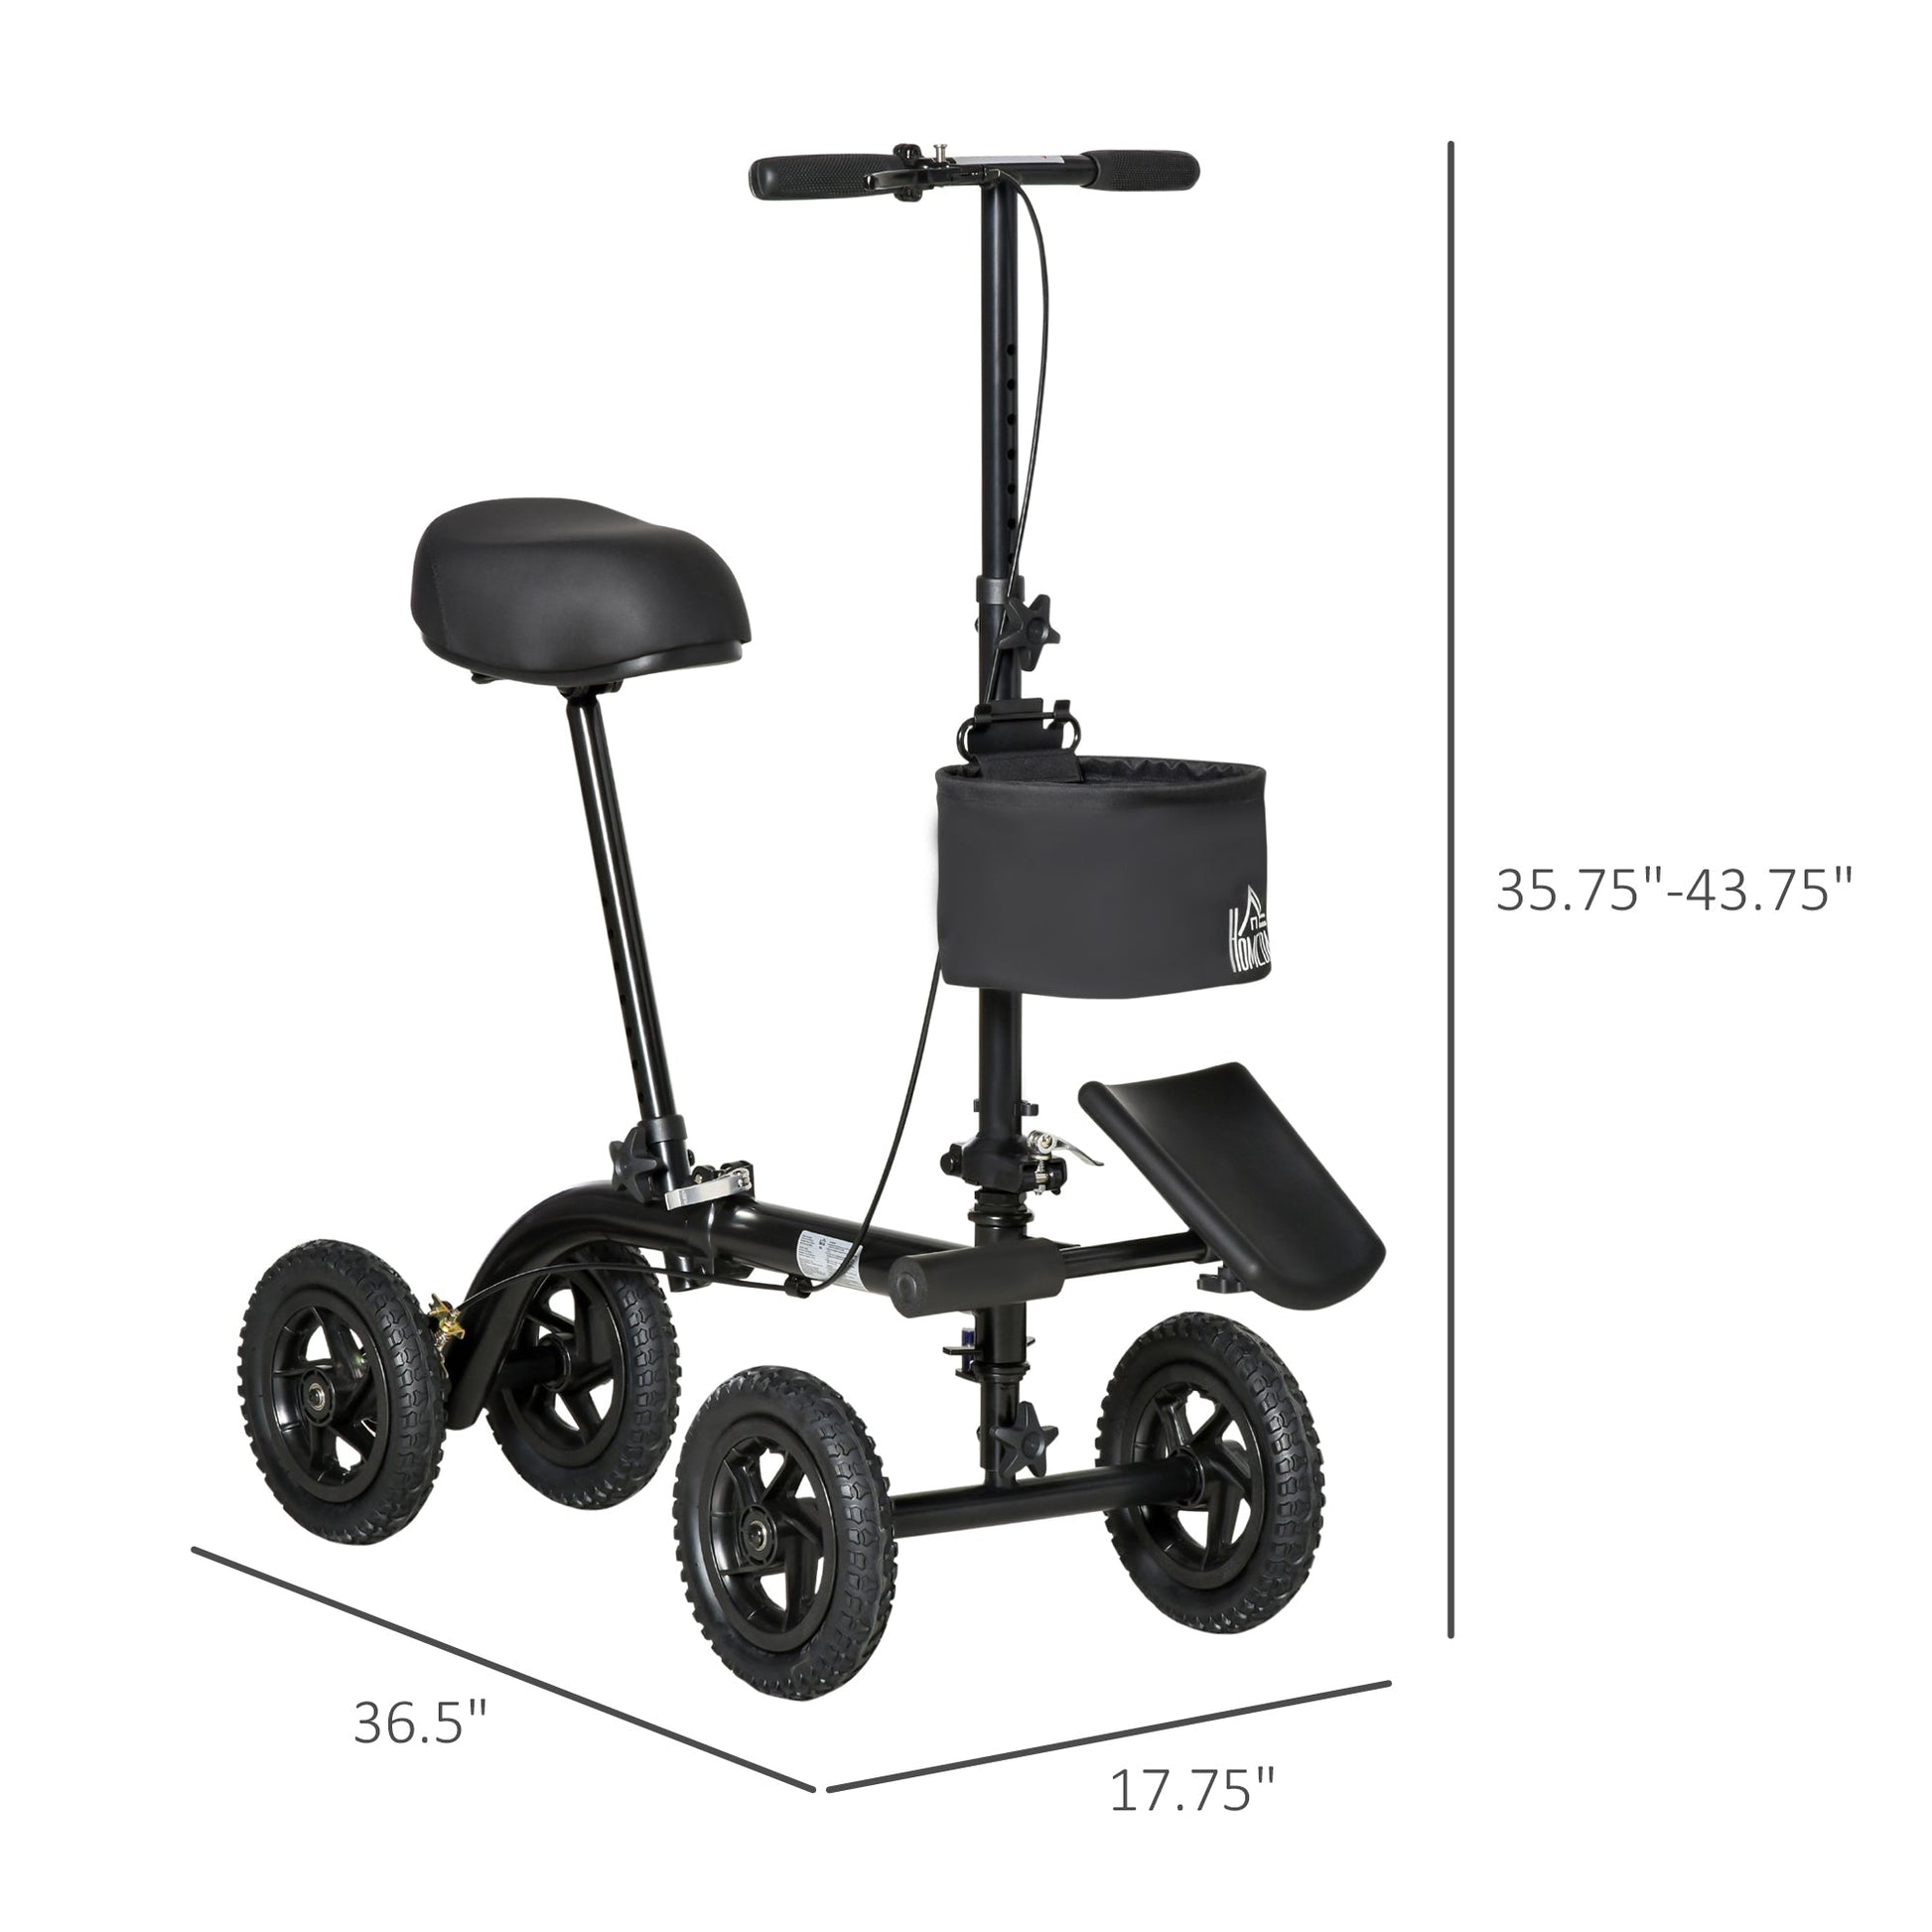 Seated Knee Walker, Foldable Steerable Medical Knee Scooter, Crutch Alternative with Braking System, Storage Bag for Foot Injuries, Black at Gallery Canada